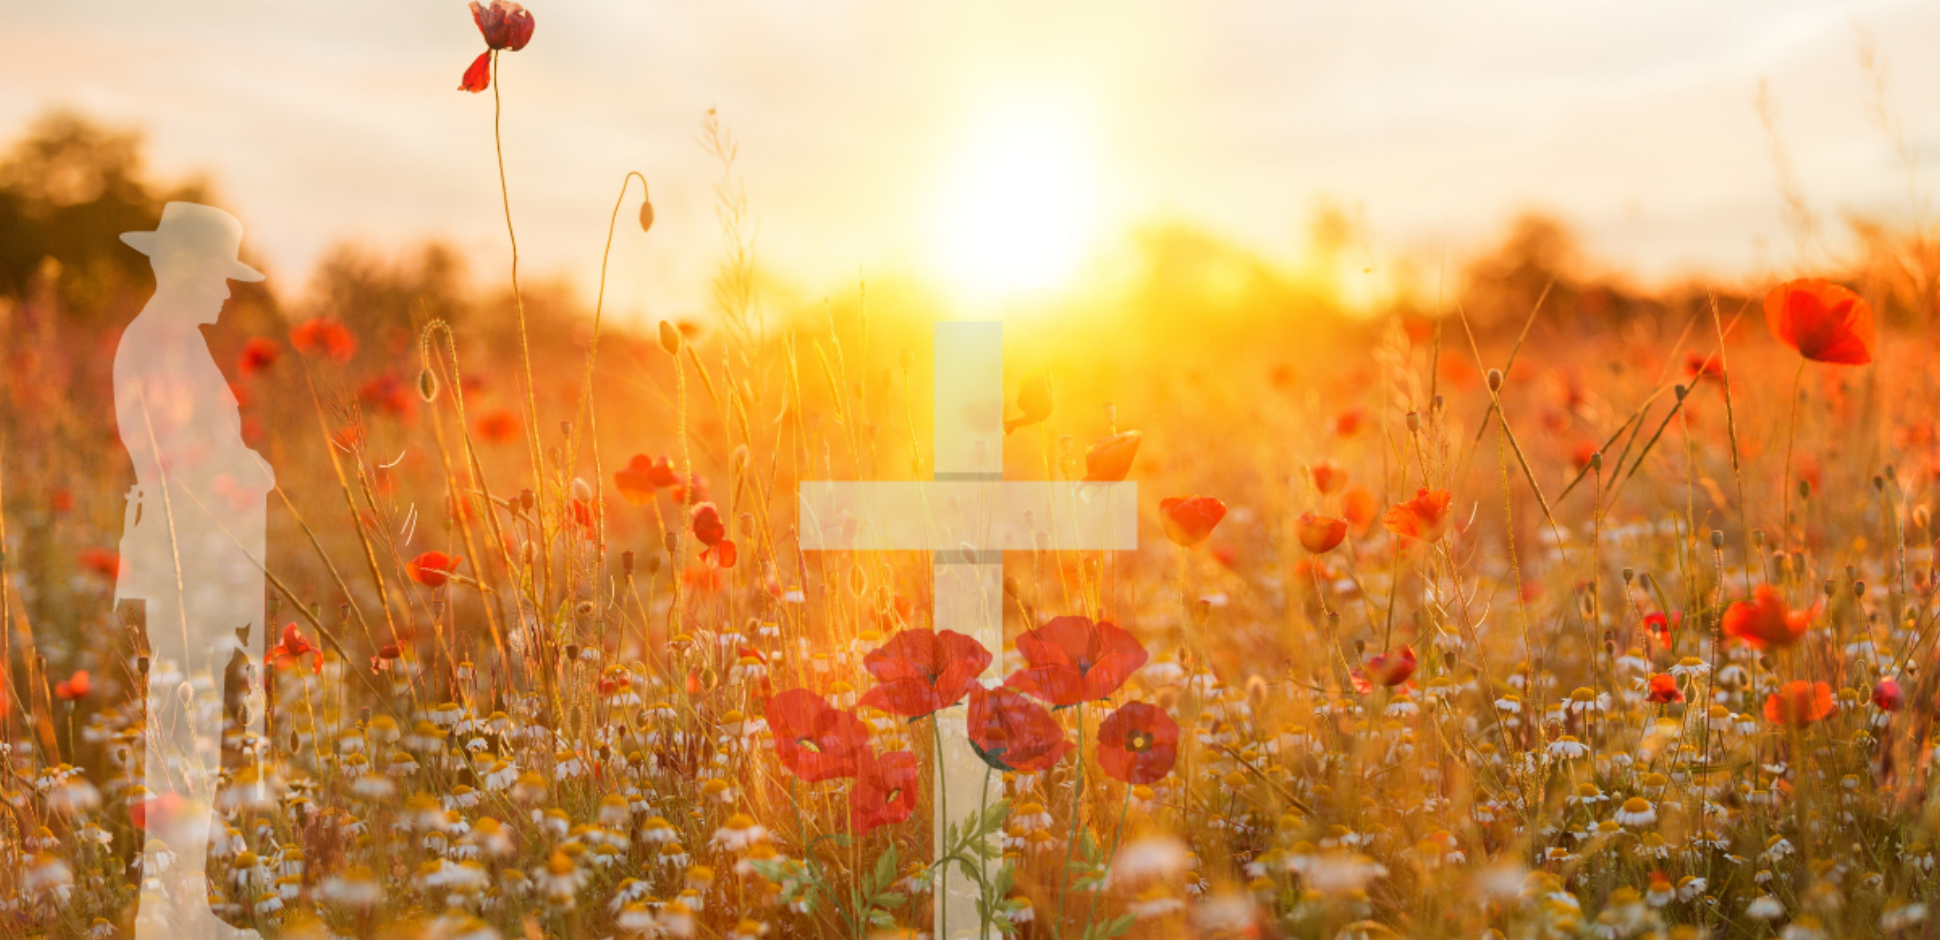 Image of poppies with the sunrise, over lay of ANZAC soldier standing on the side